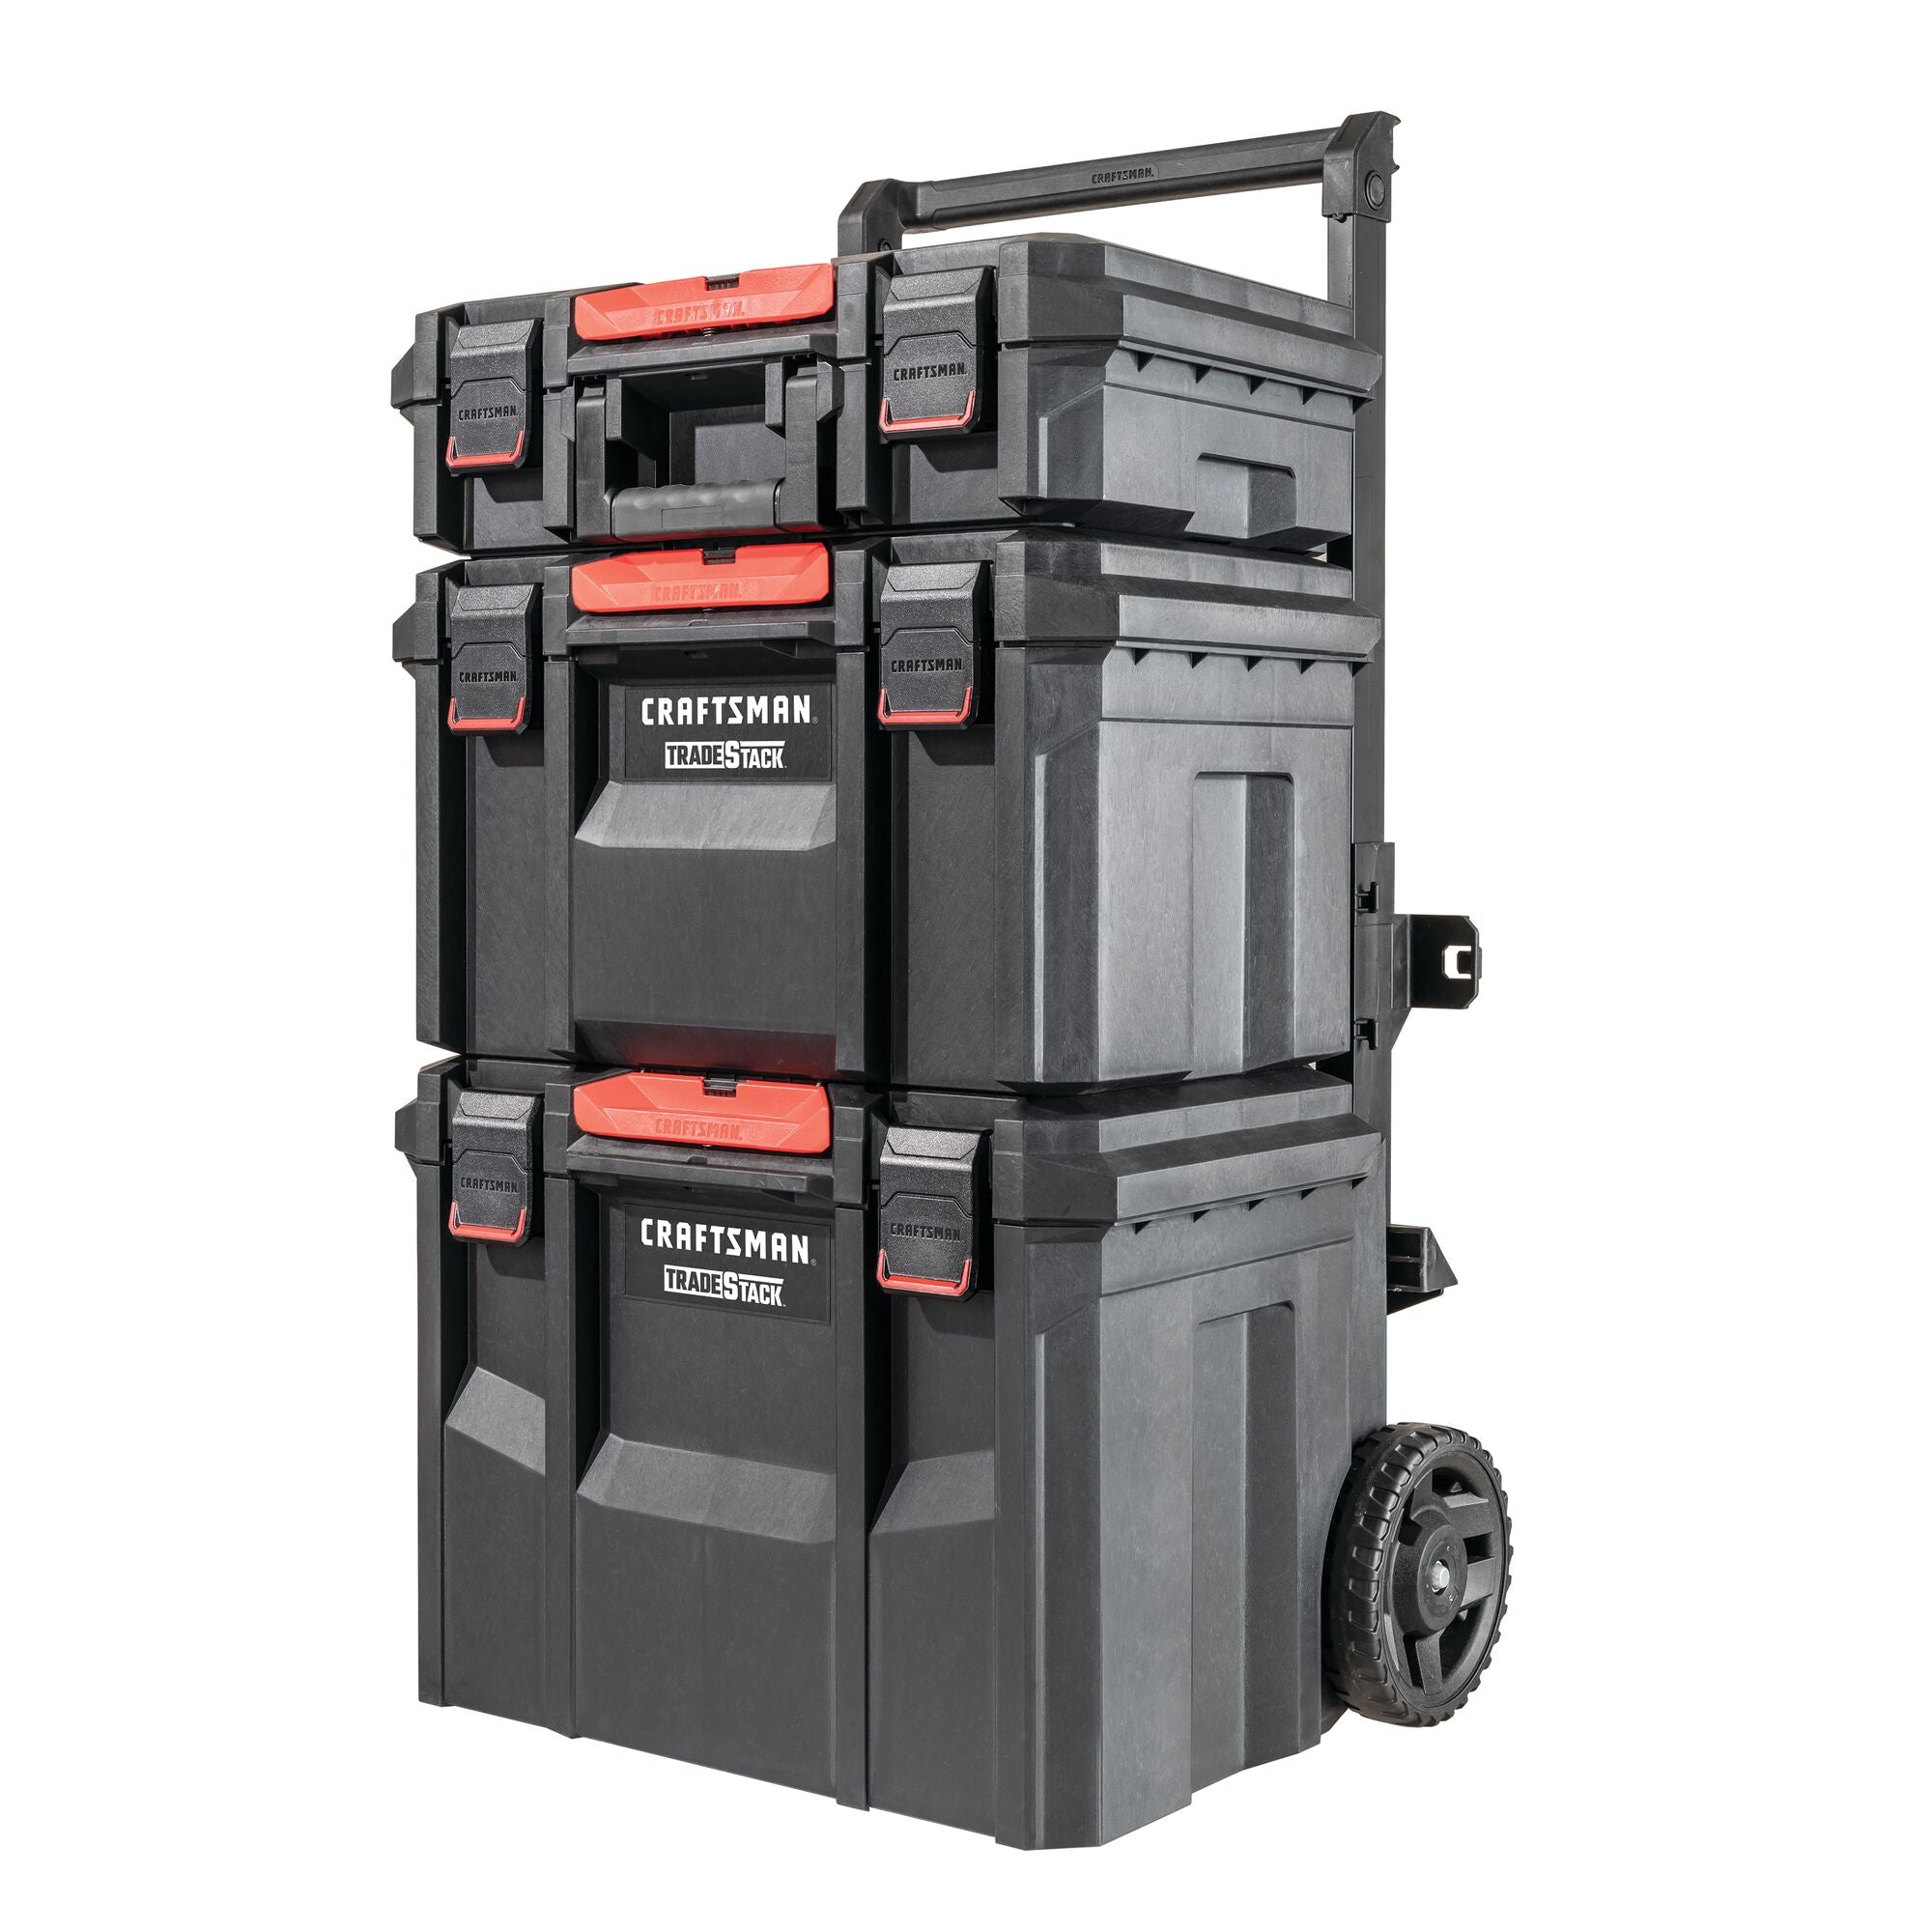 Stack On 23in. Professional Plastic Toolbox